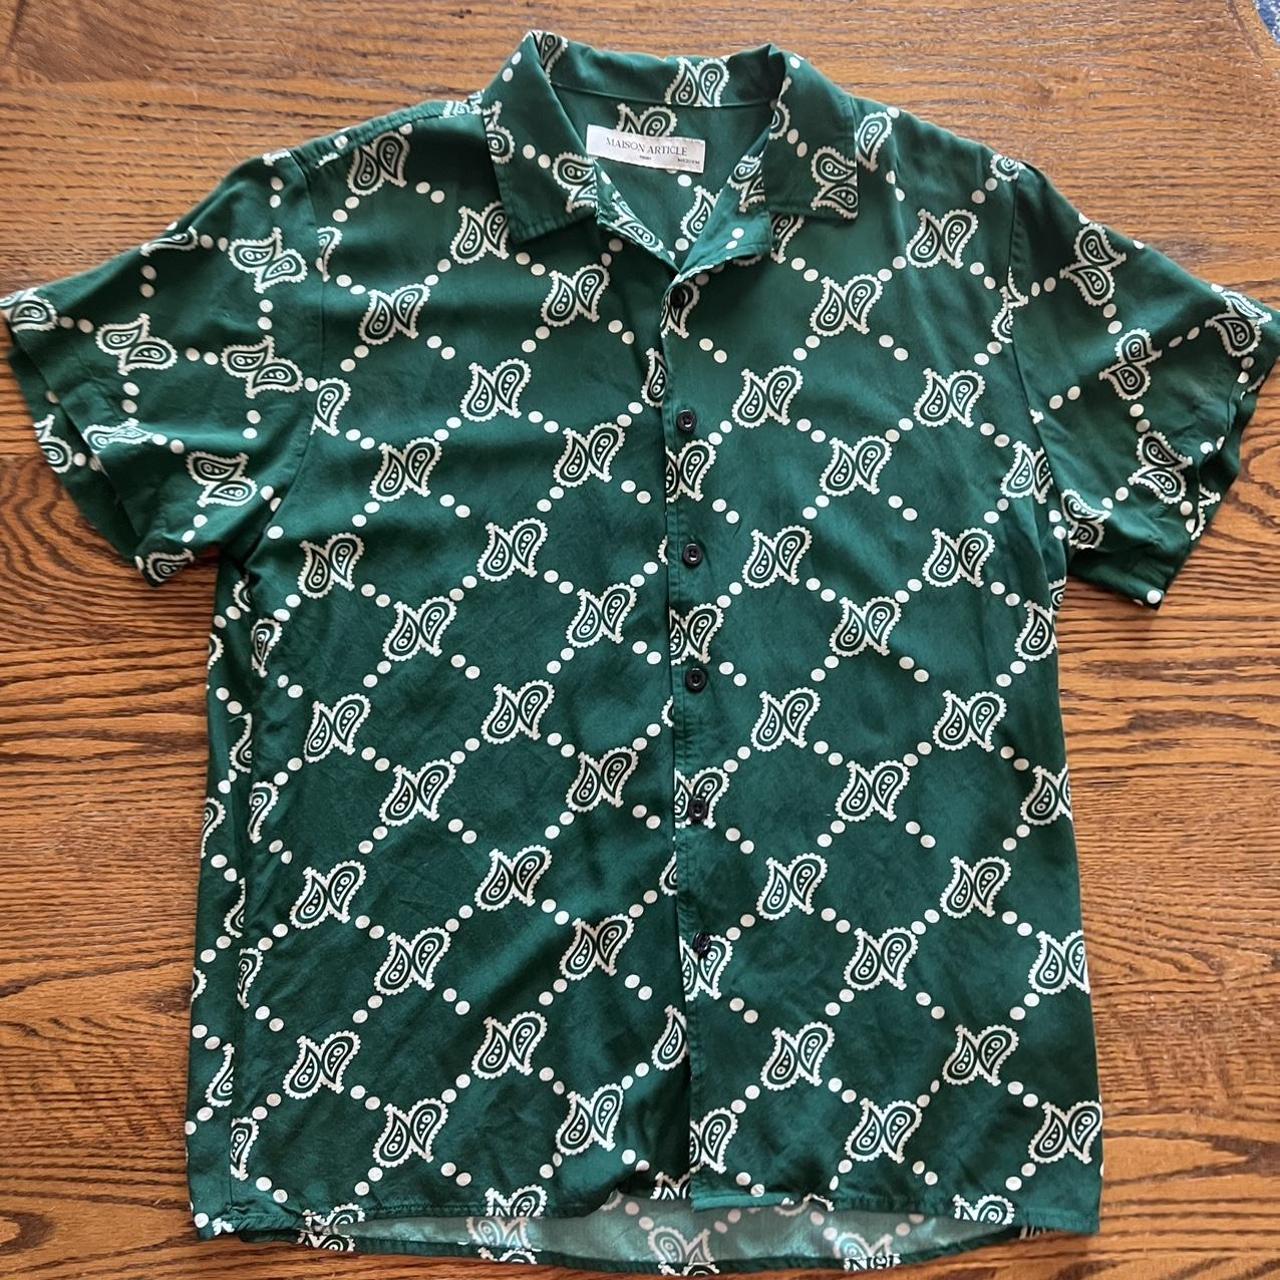 Article One Men's White and Green Shirt